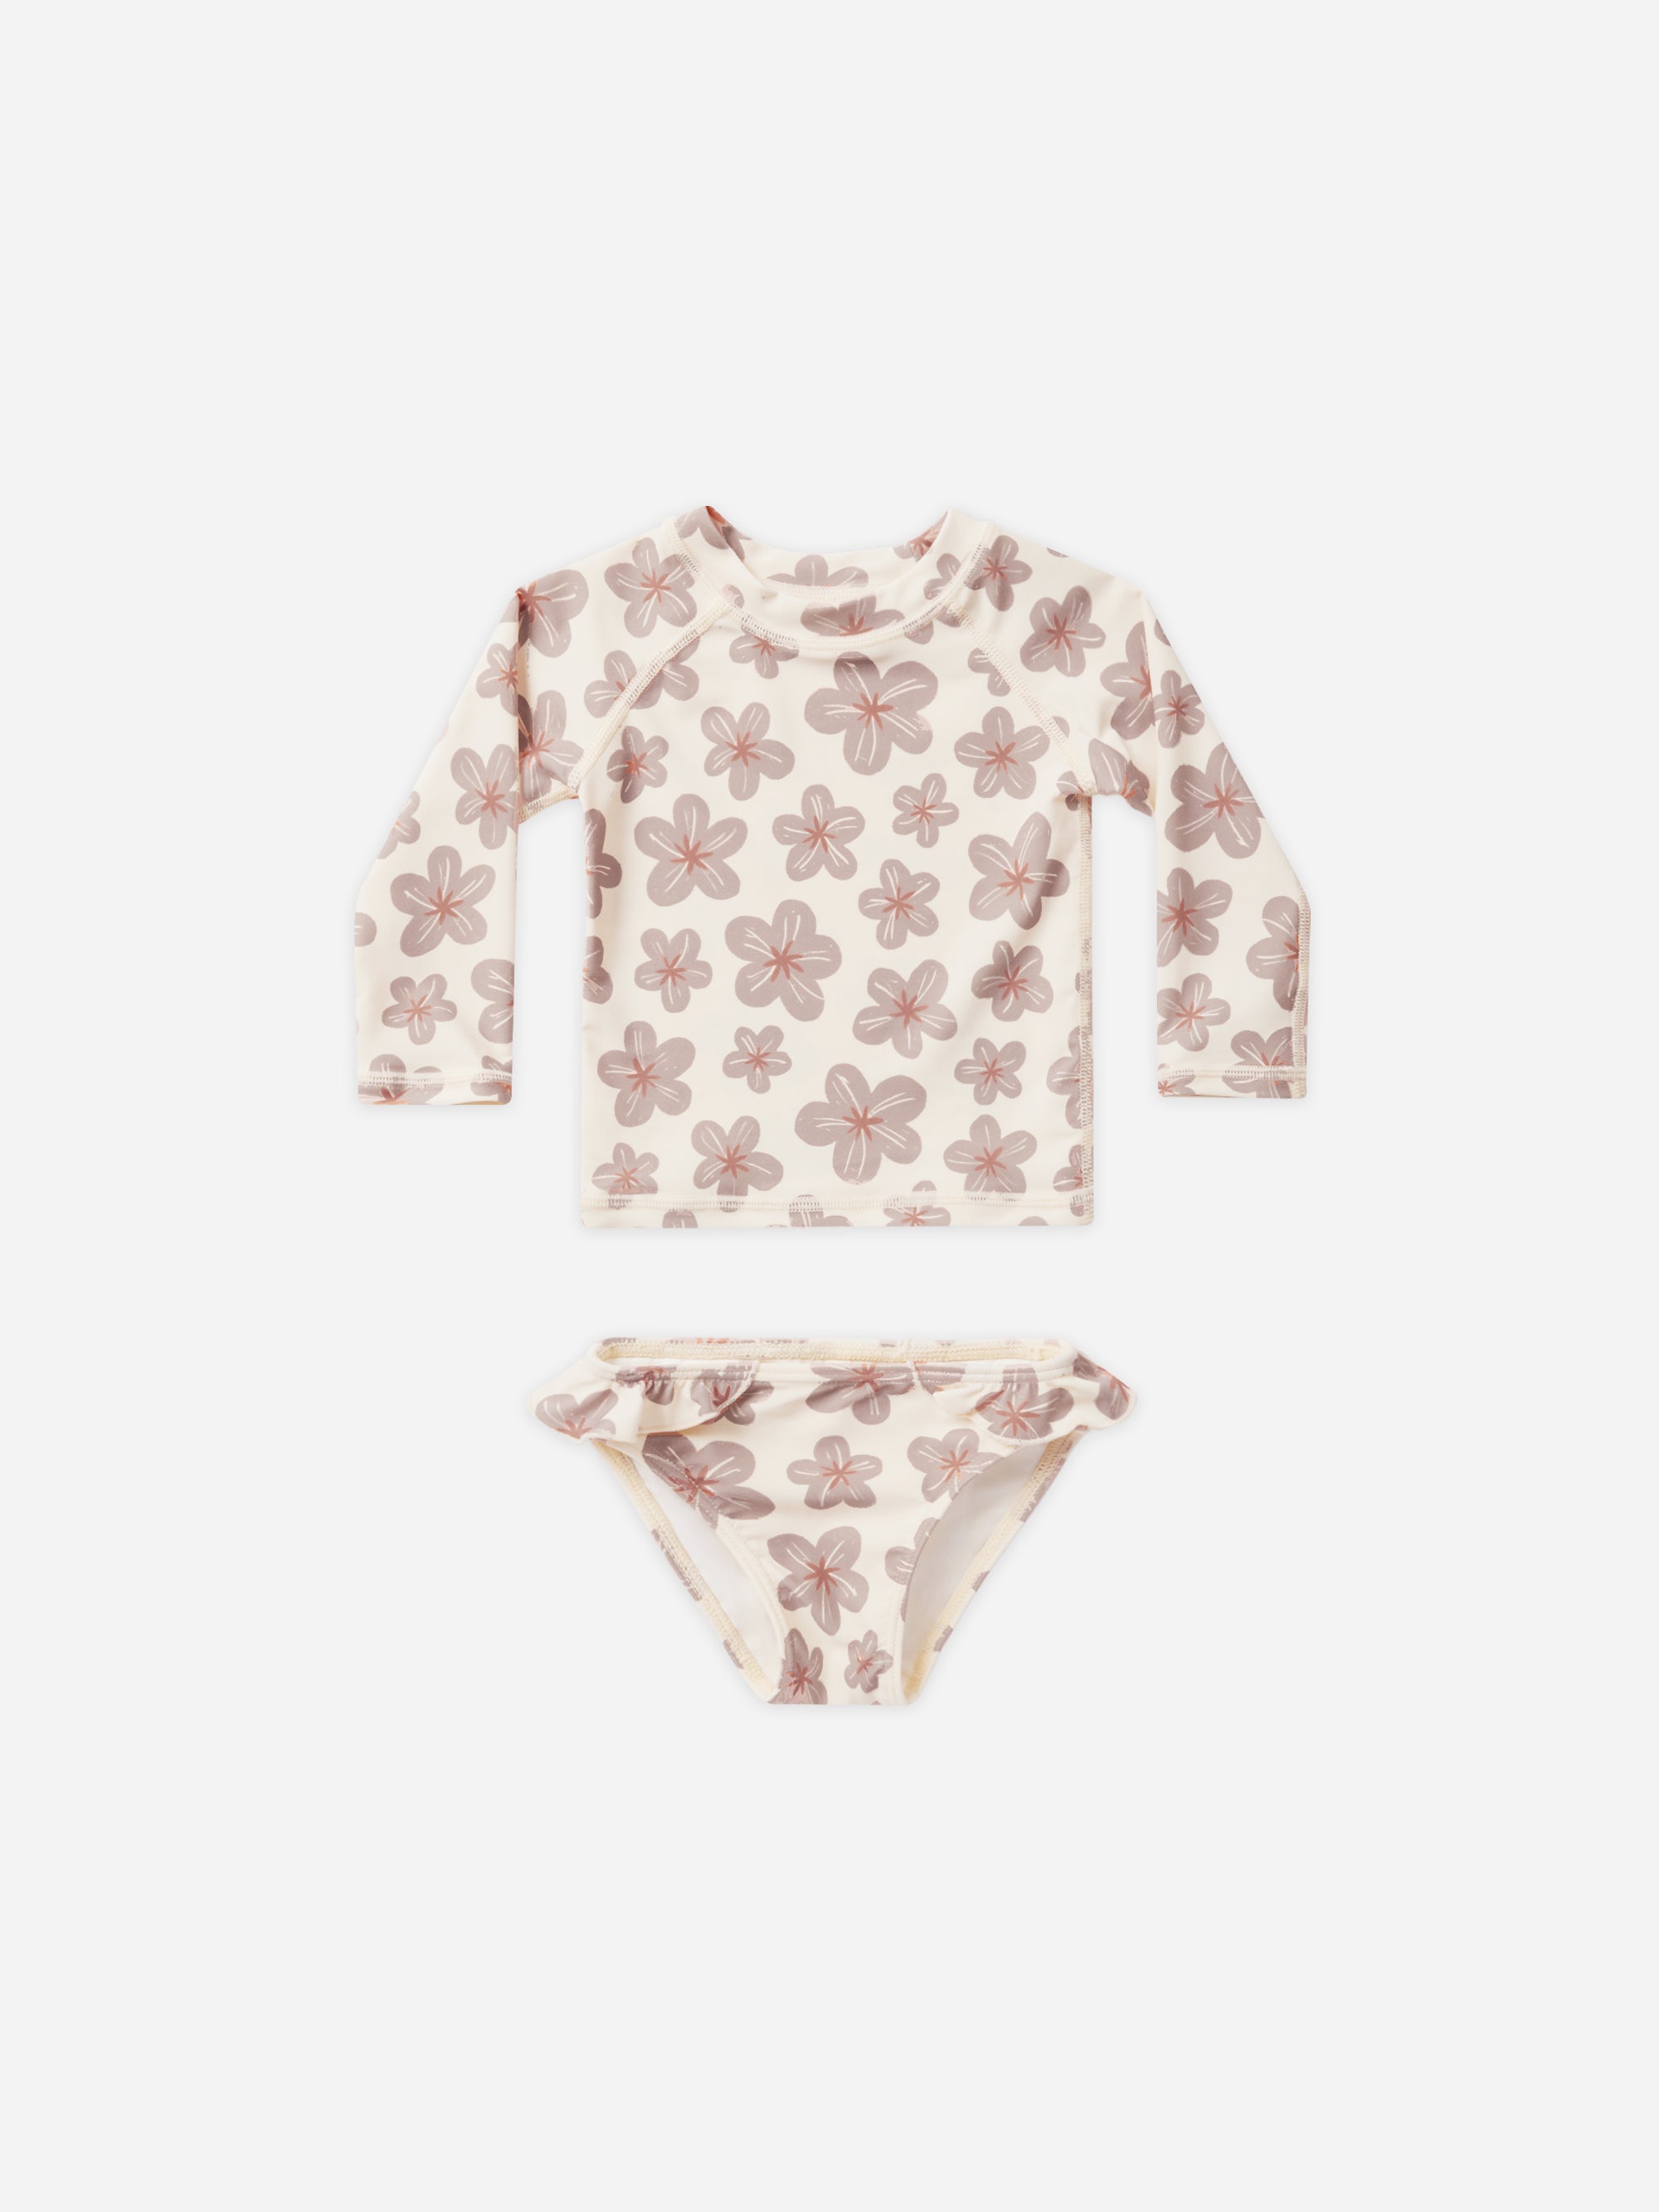 Maryn Rash Guard Set || Hibiscus - Rylee + Cru | Kids Clothes | Trendy Baby Clothes | Modern Infant Outfits |